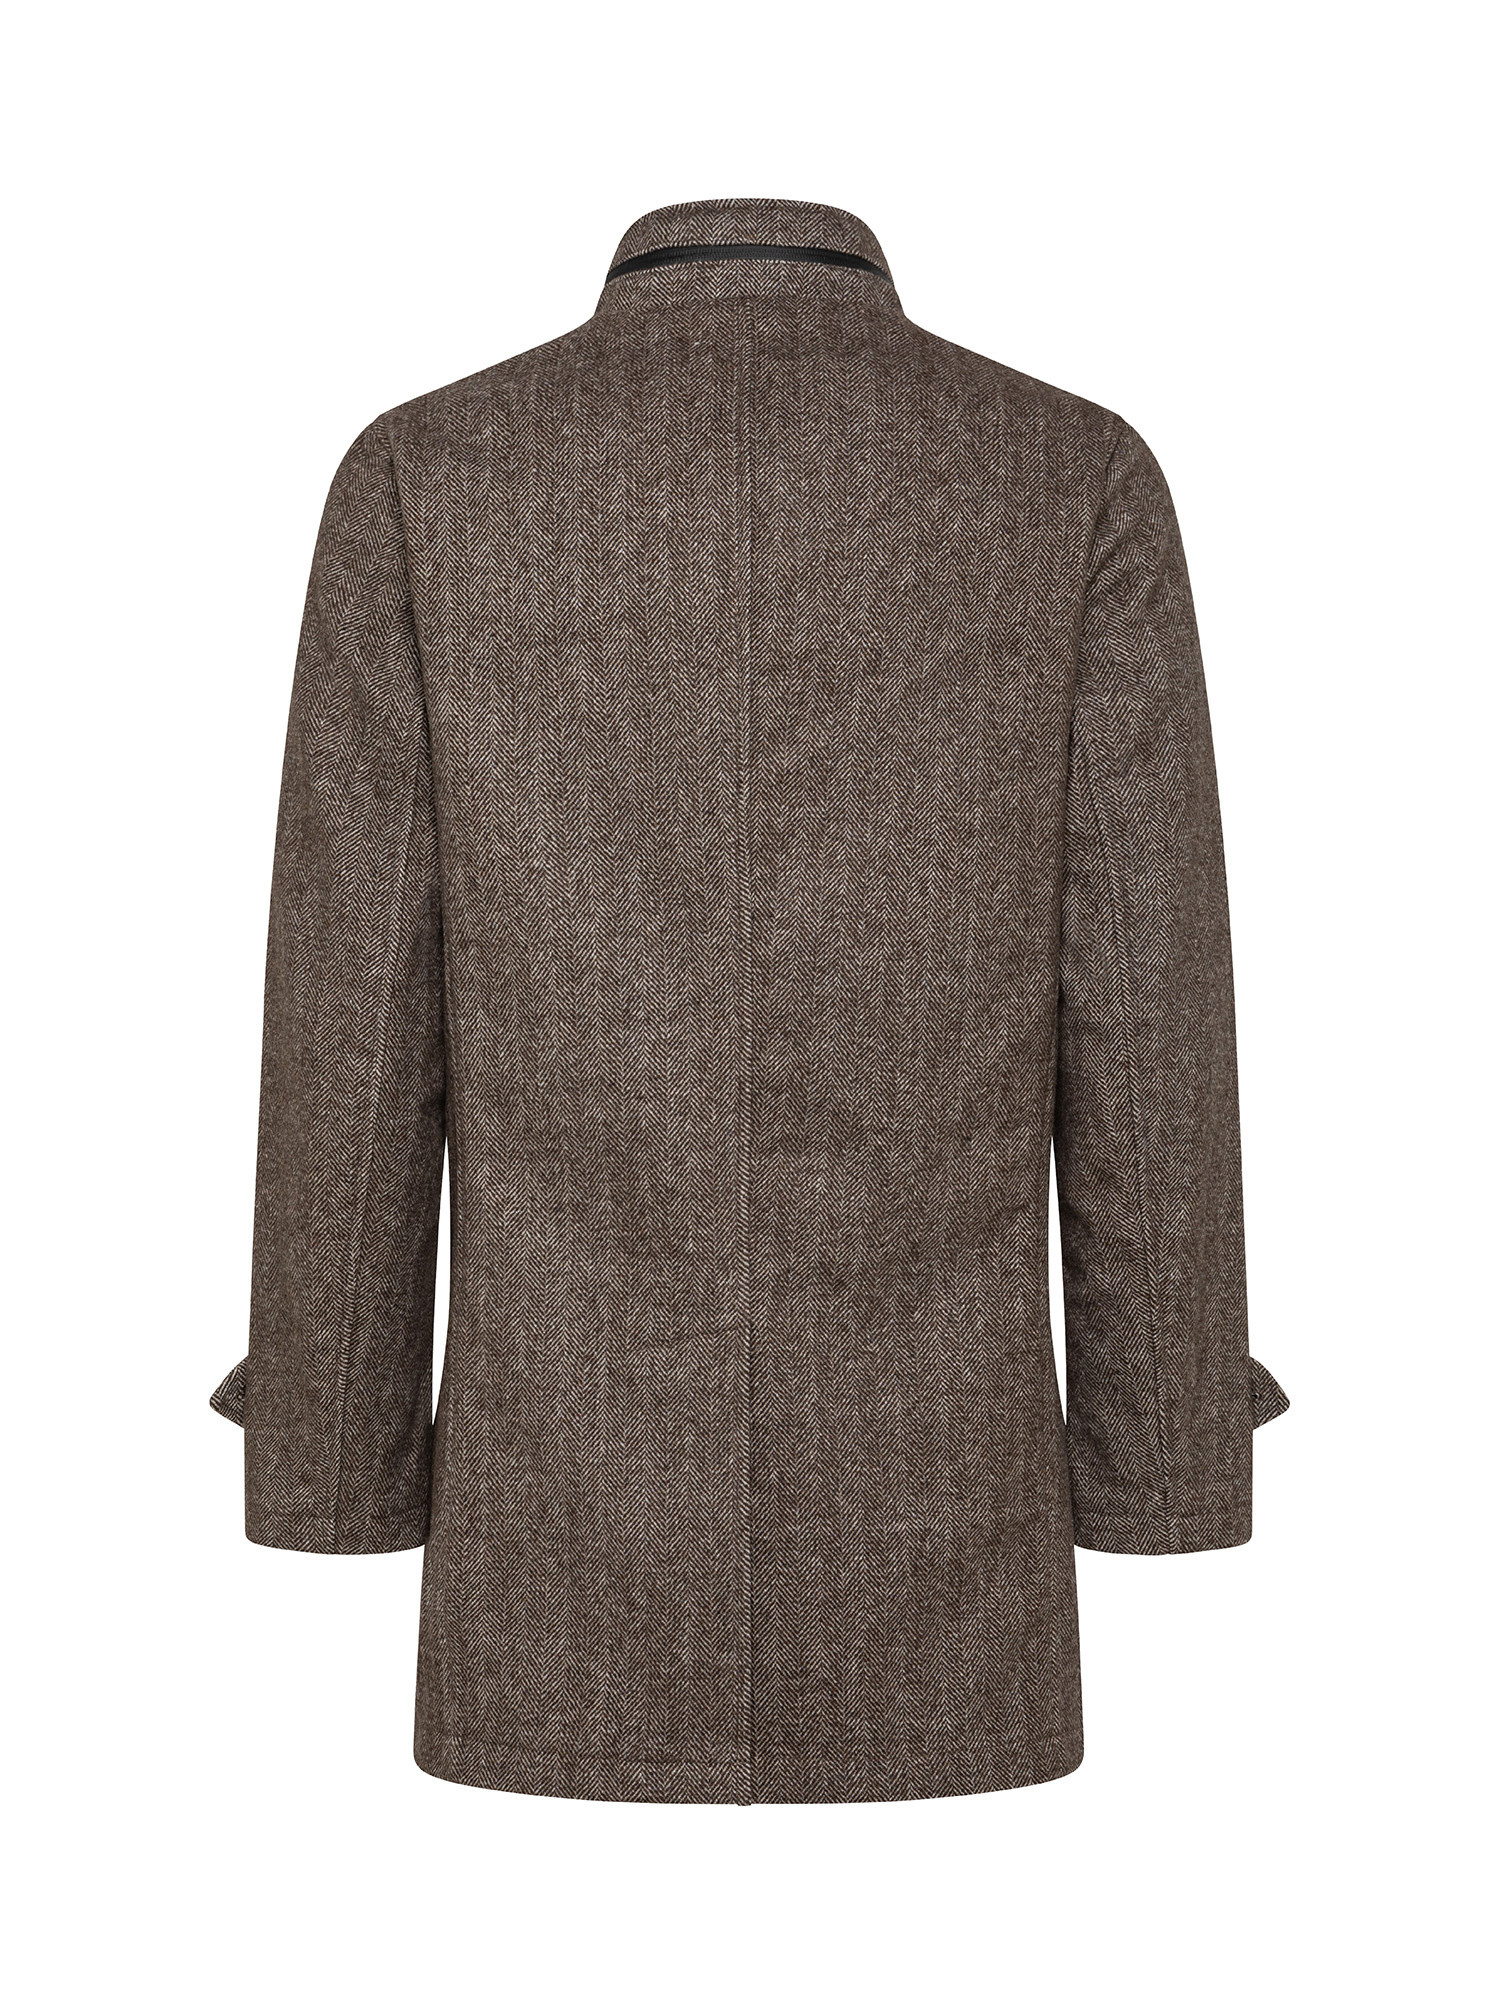 Luca D'Altieri - Single-breasted wool coat, Rope, large image number 1